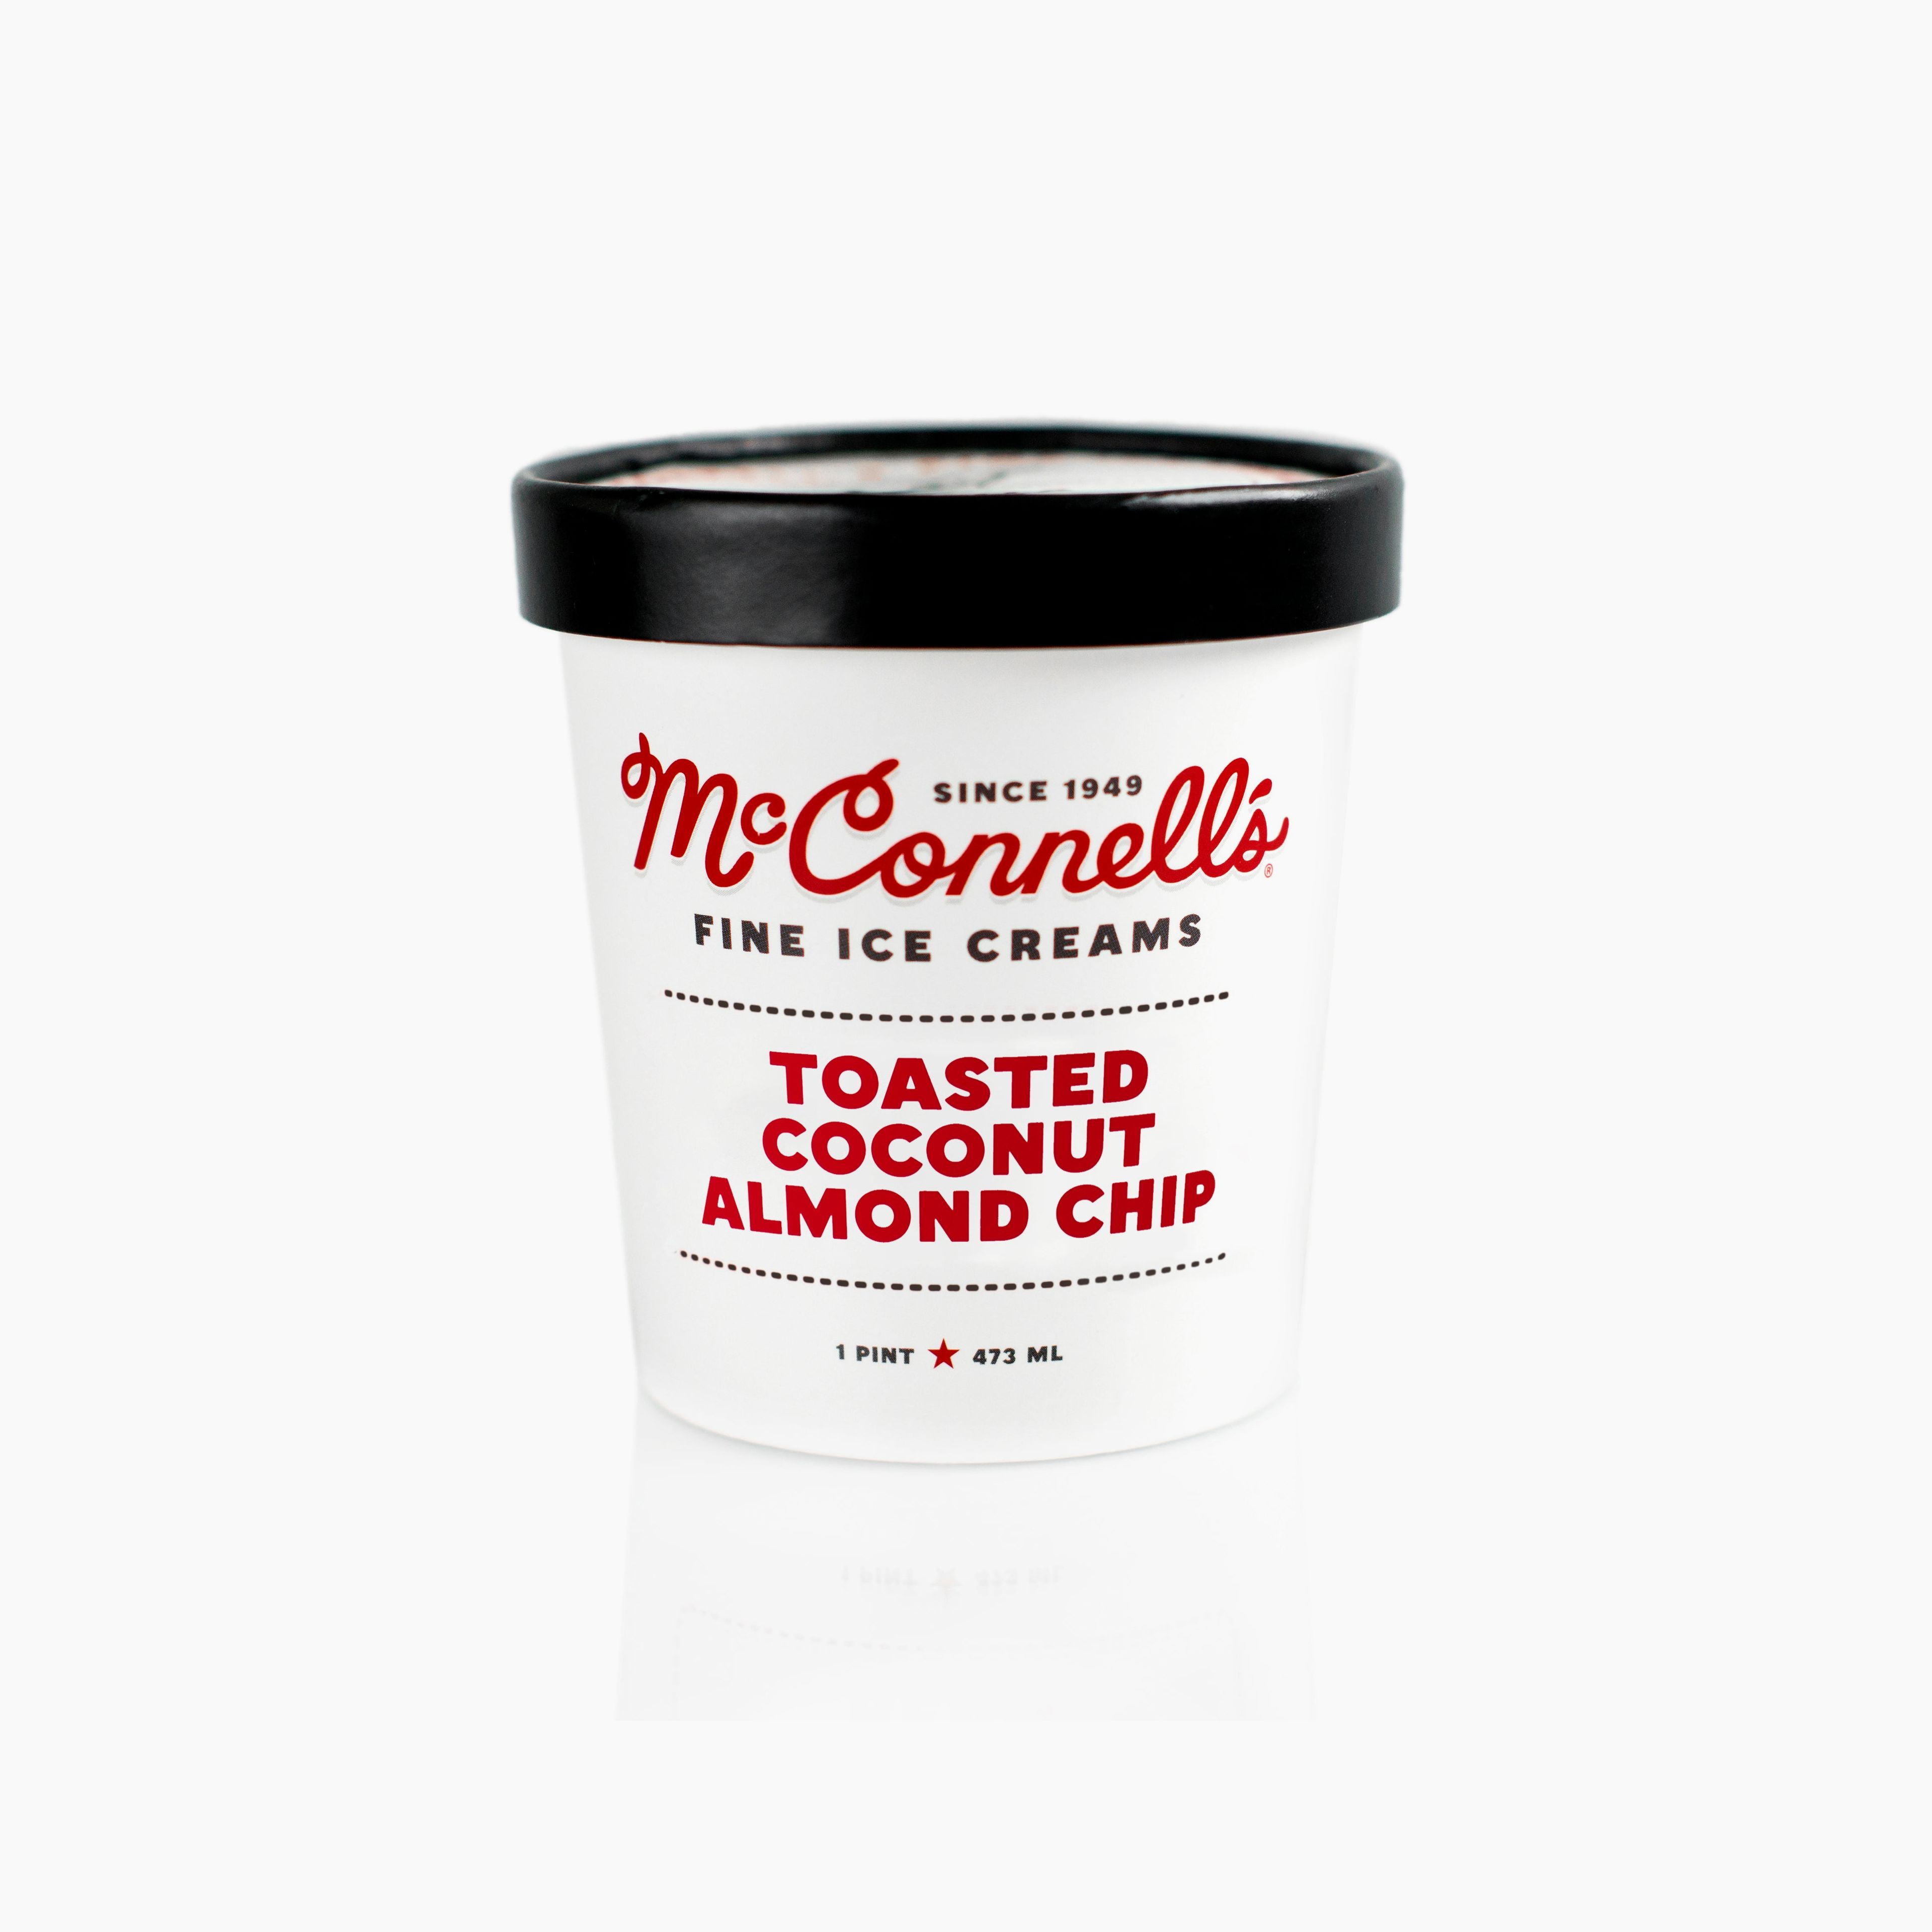 Toasted Coconut Almond Chip